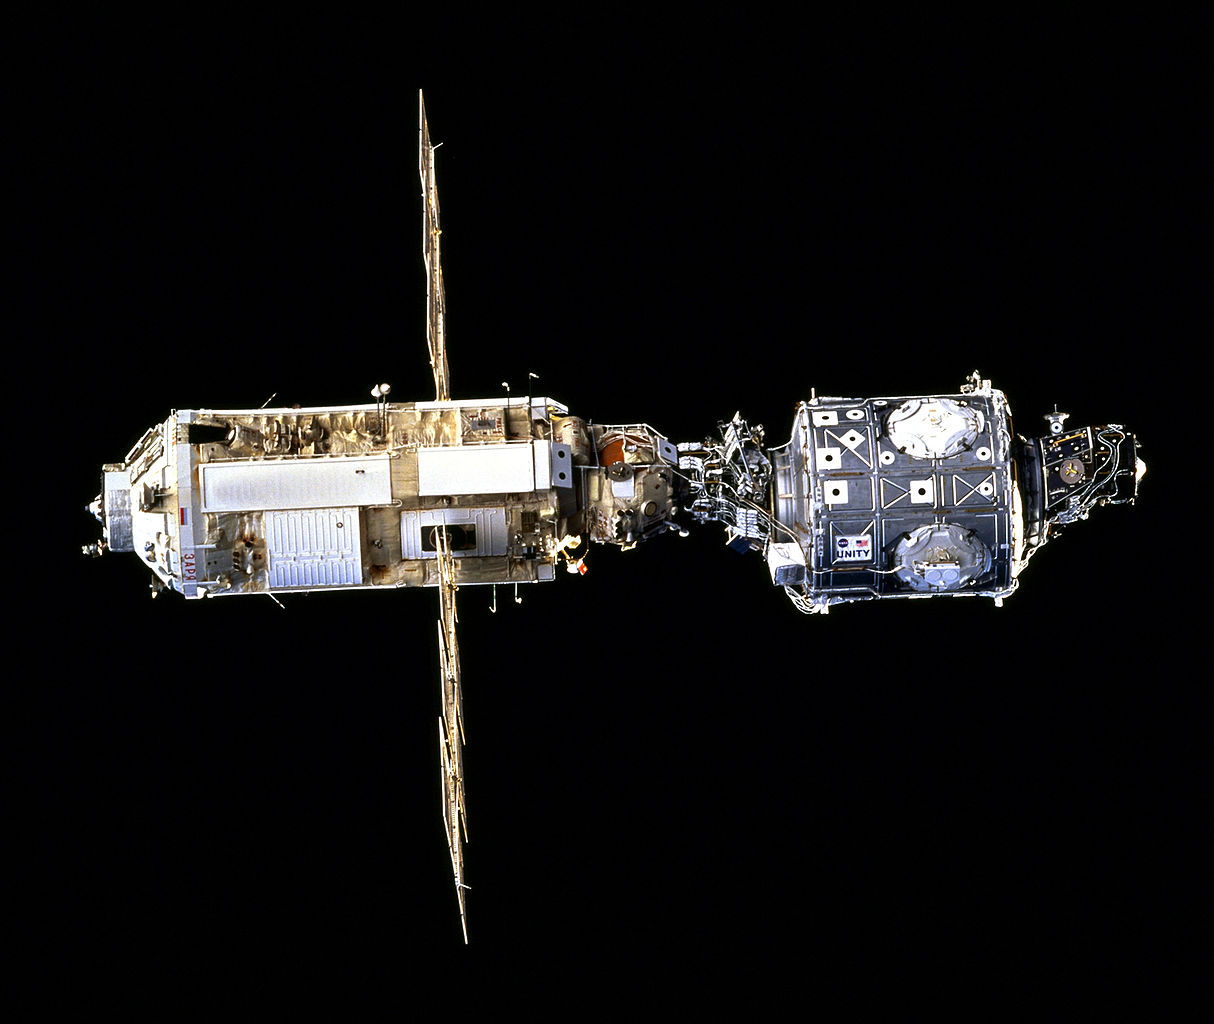 The ISS at 2 modules